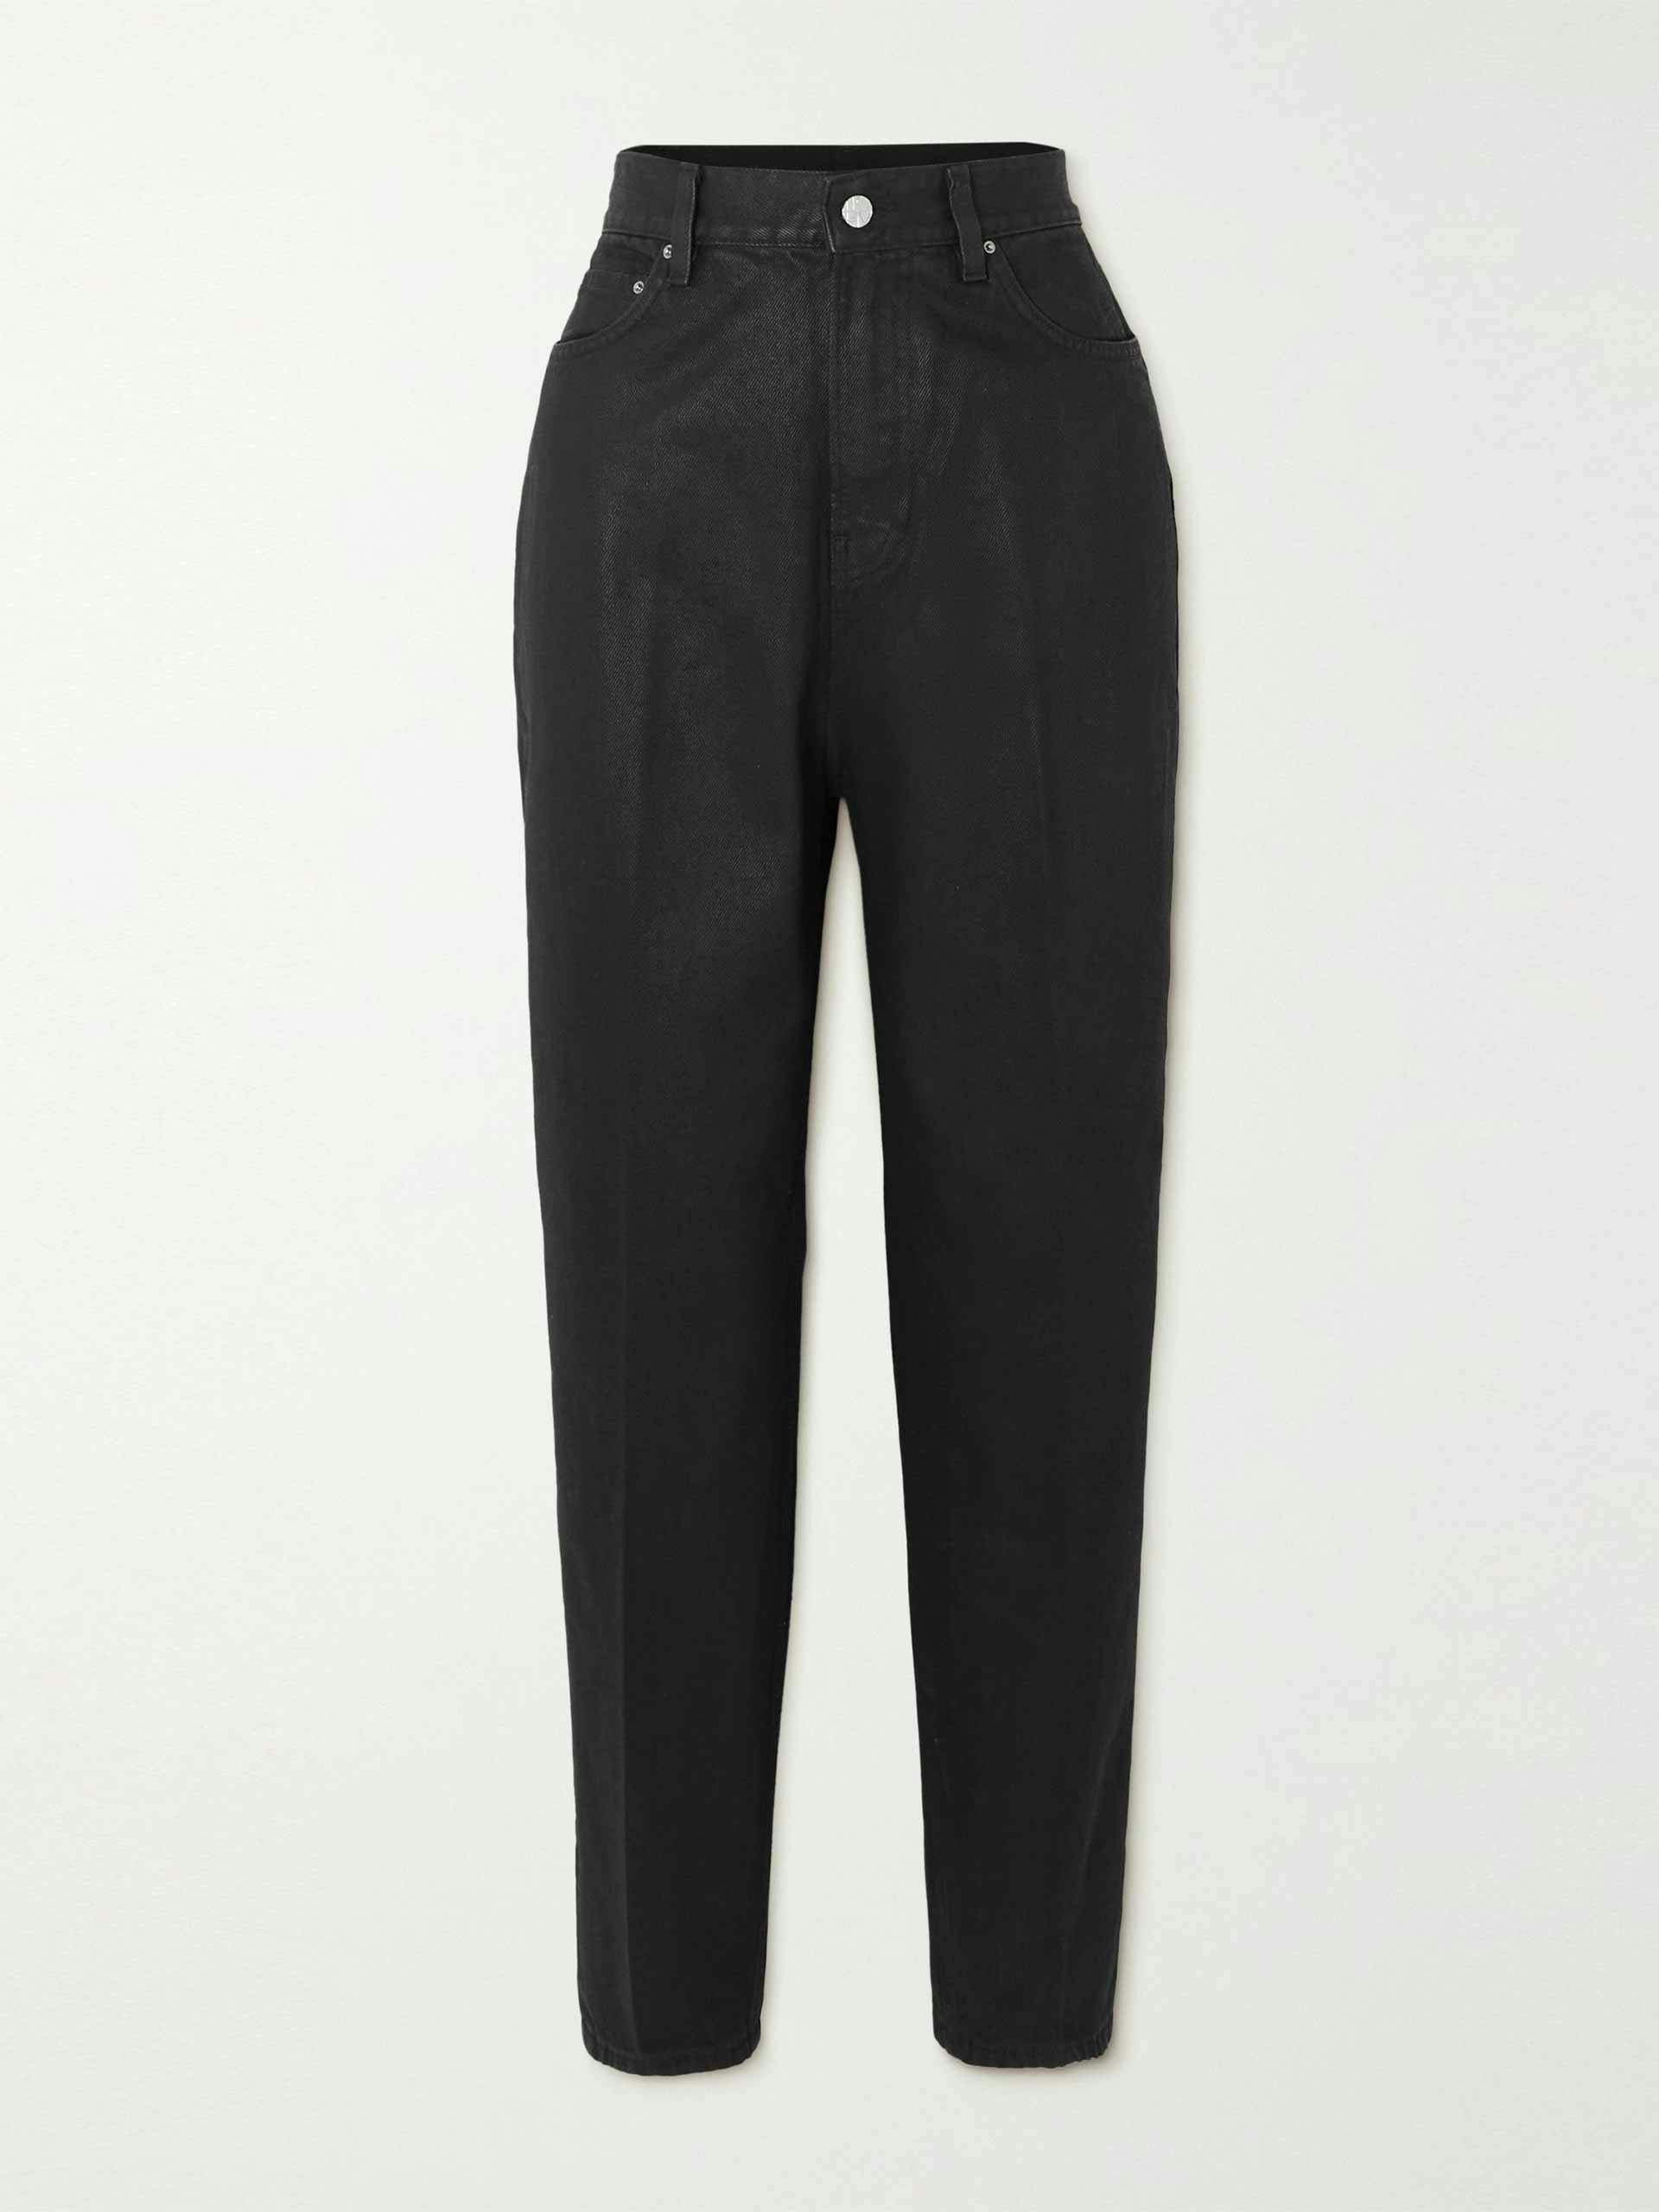 Black high rise tapered jeans